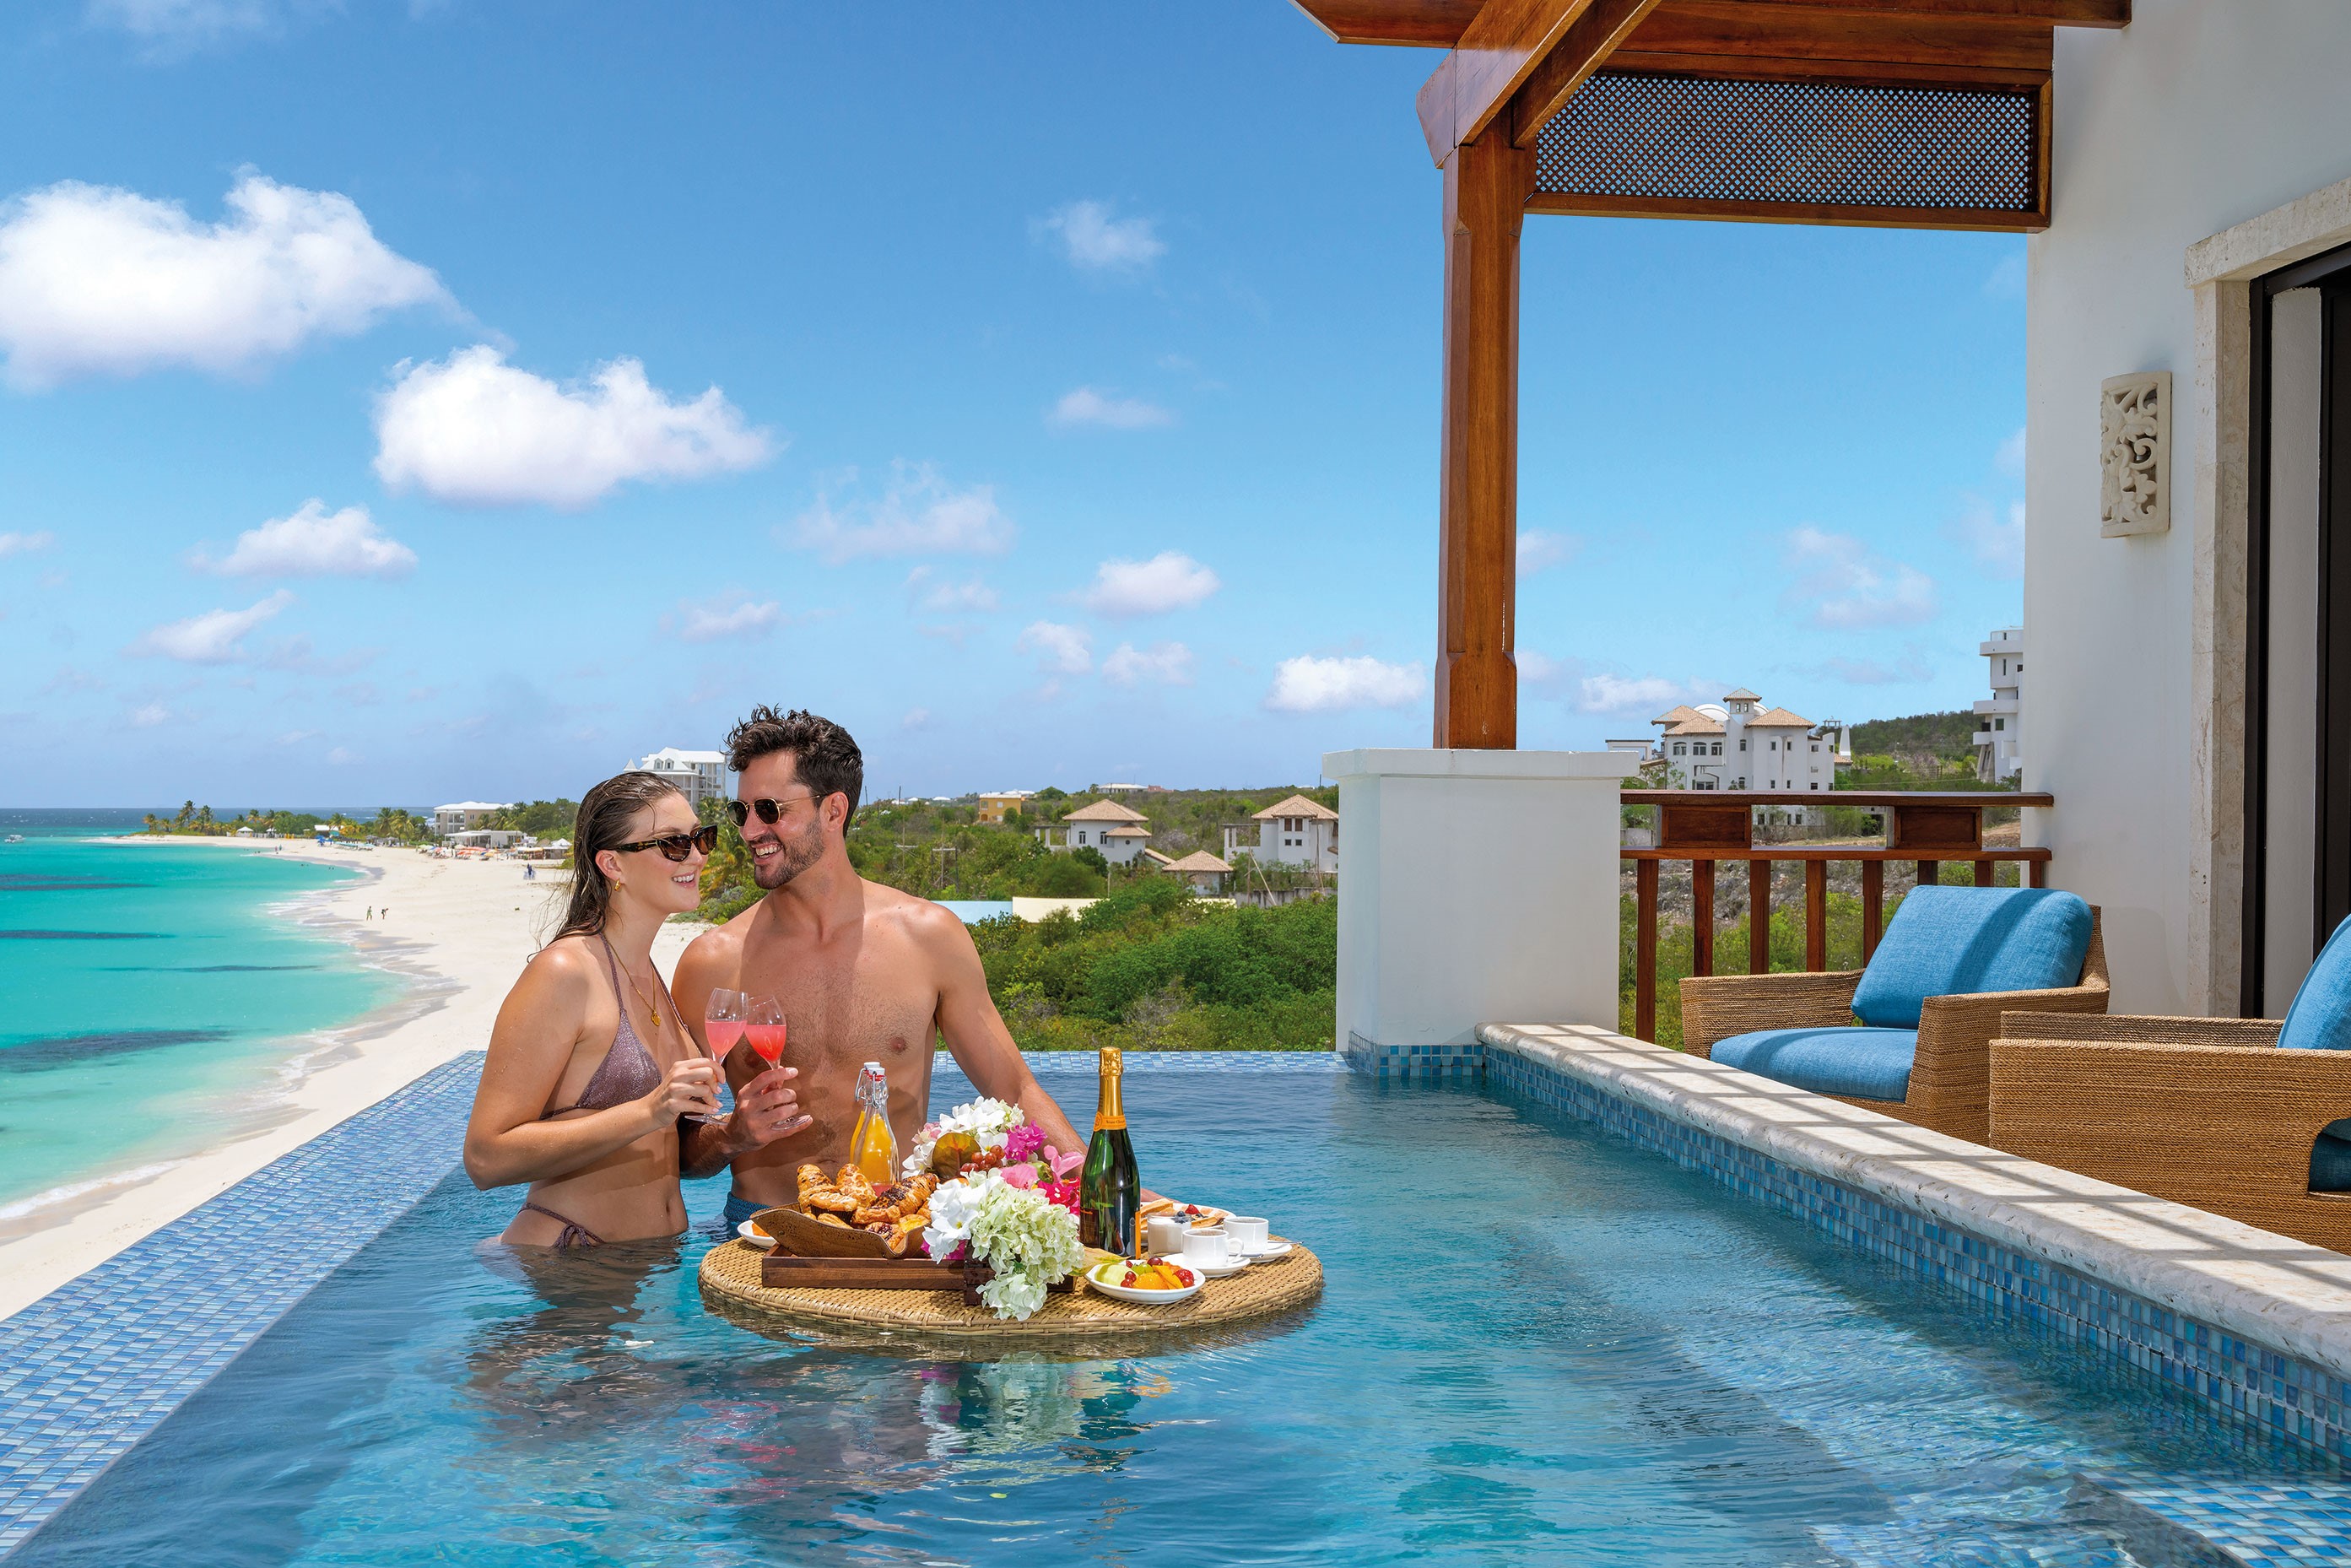 Man and woman sitting in pool with champagne and food